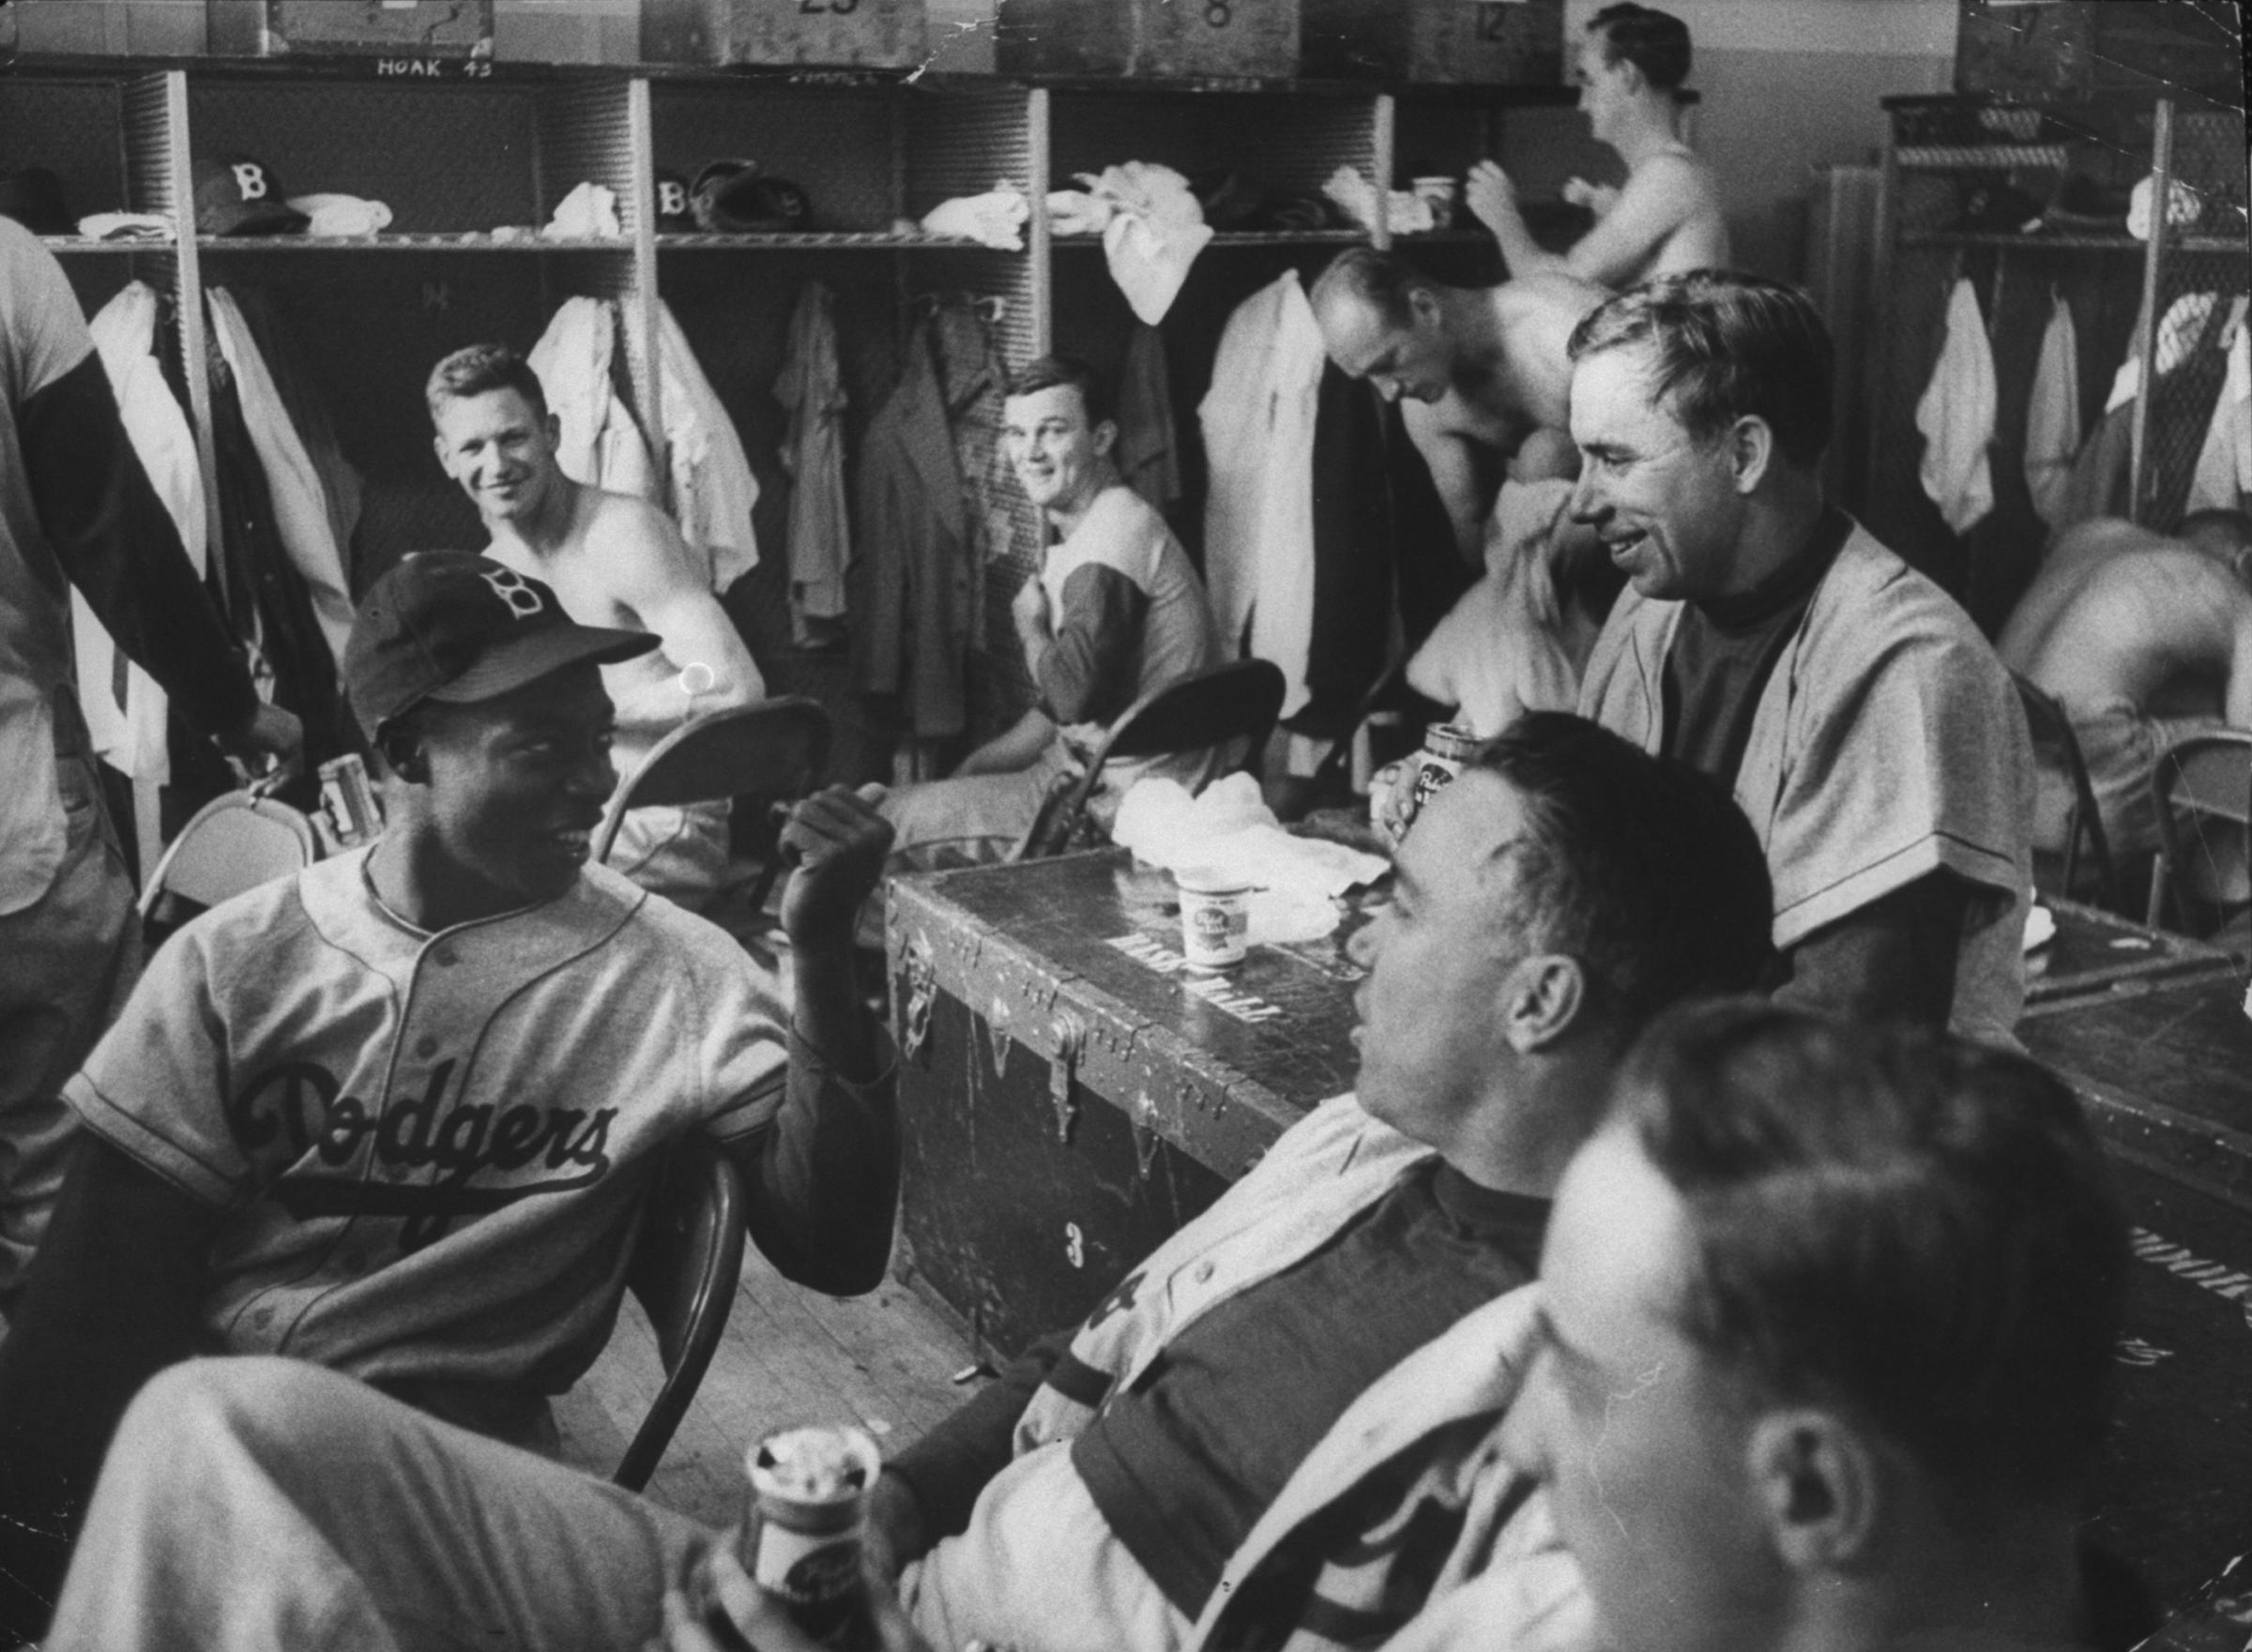 Sandy Amoros (with cap), Pee Wee Reese (on trunk), and Duke Snider (with beer) joke around after a game, May 13, 1955.